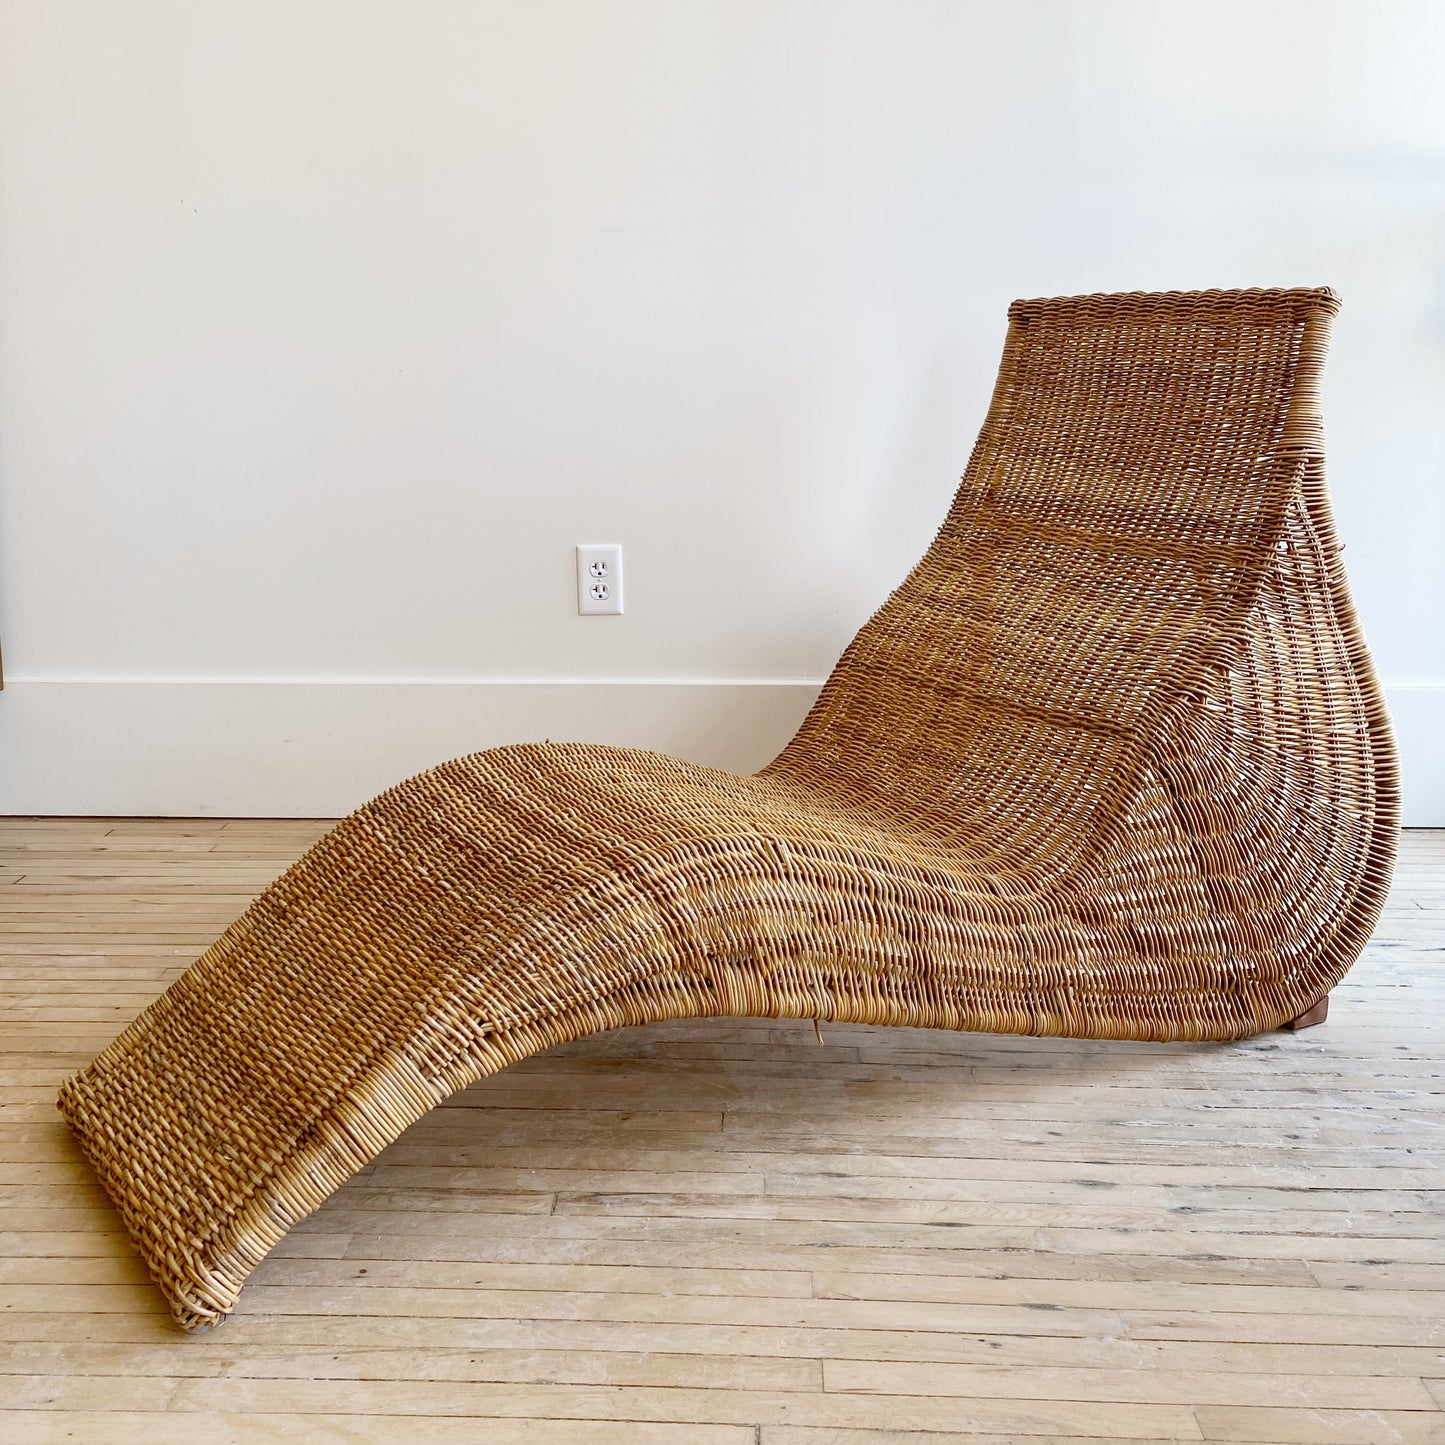 Vintage Sculptural Wicker Chaise Lounge Chair